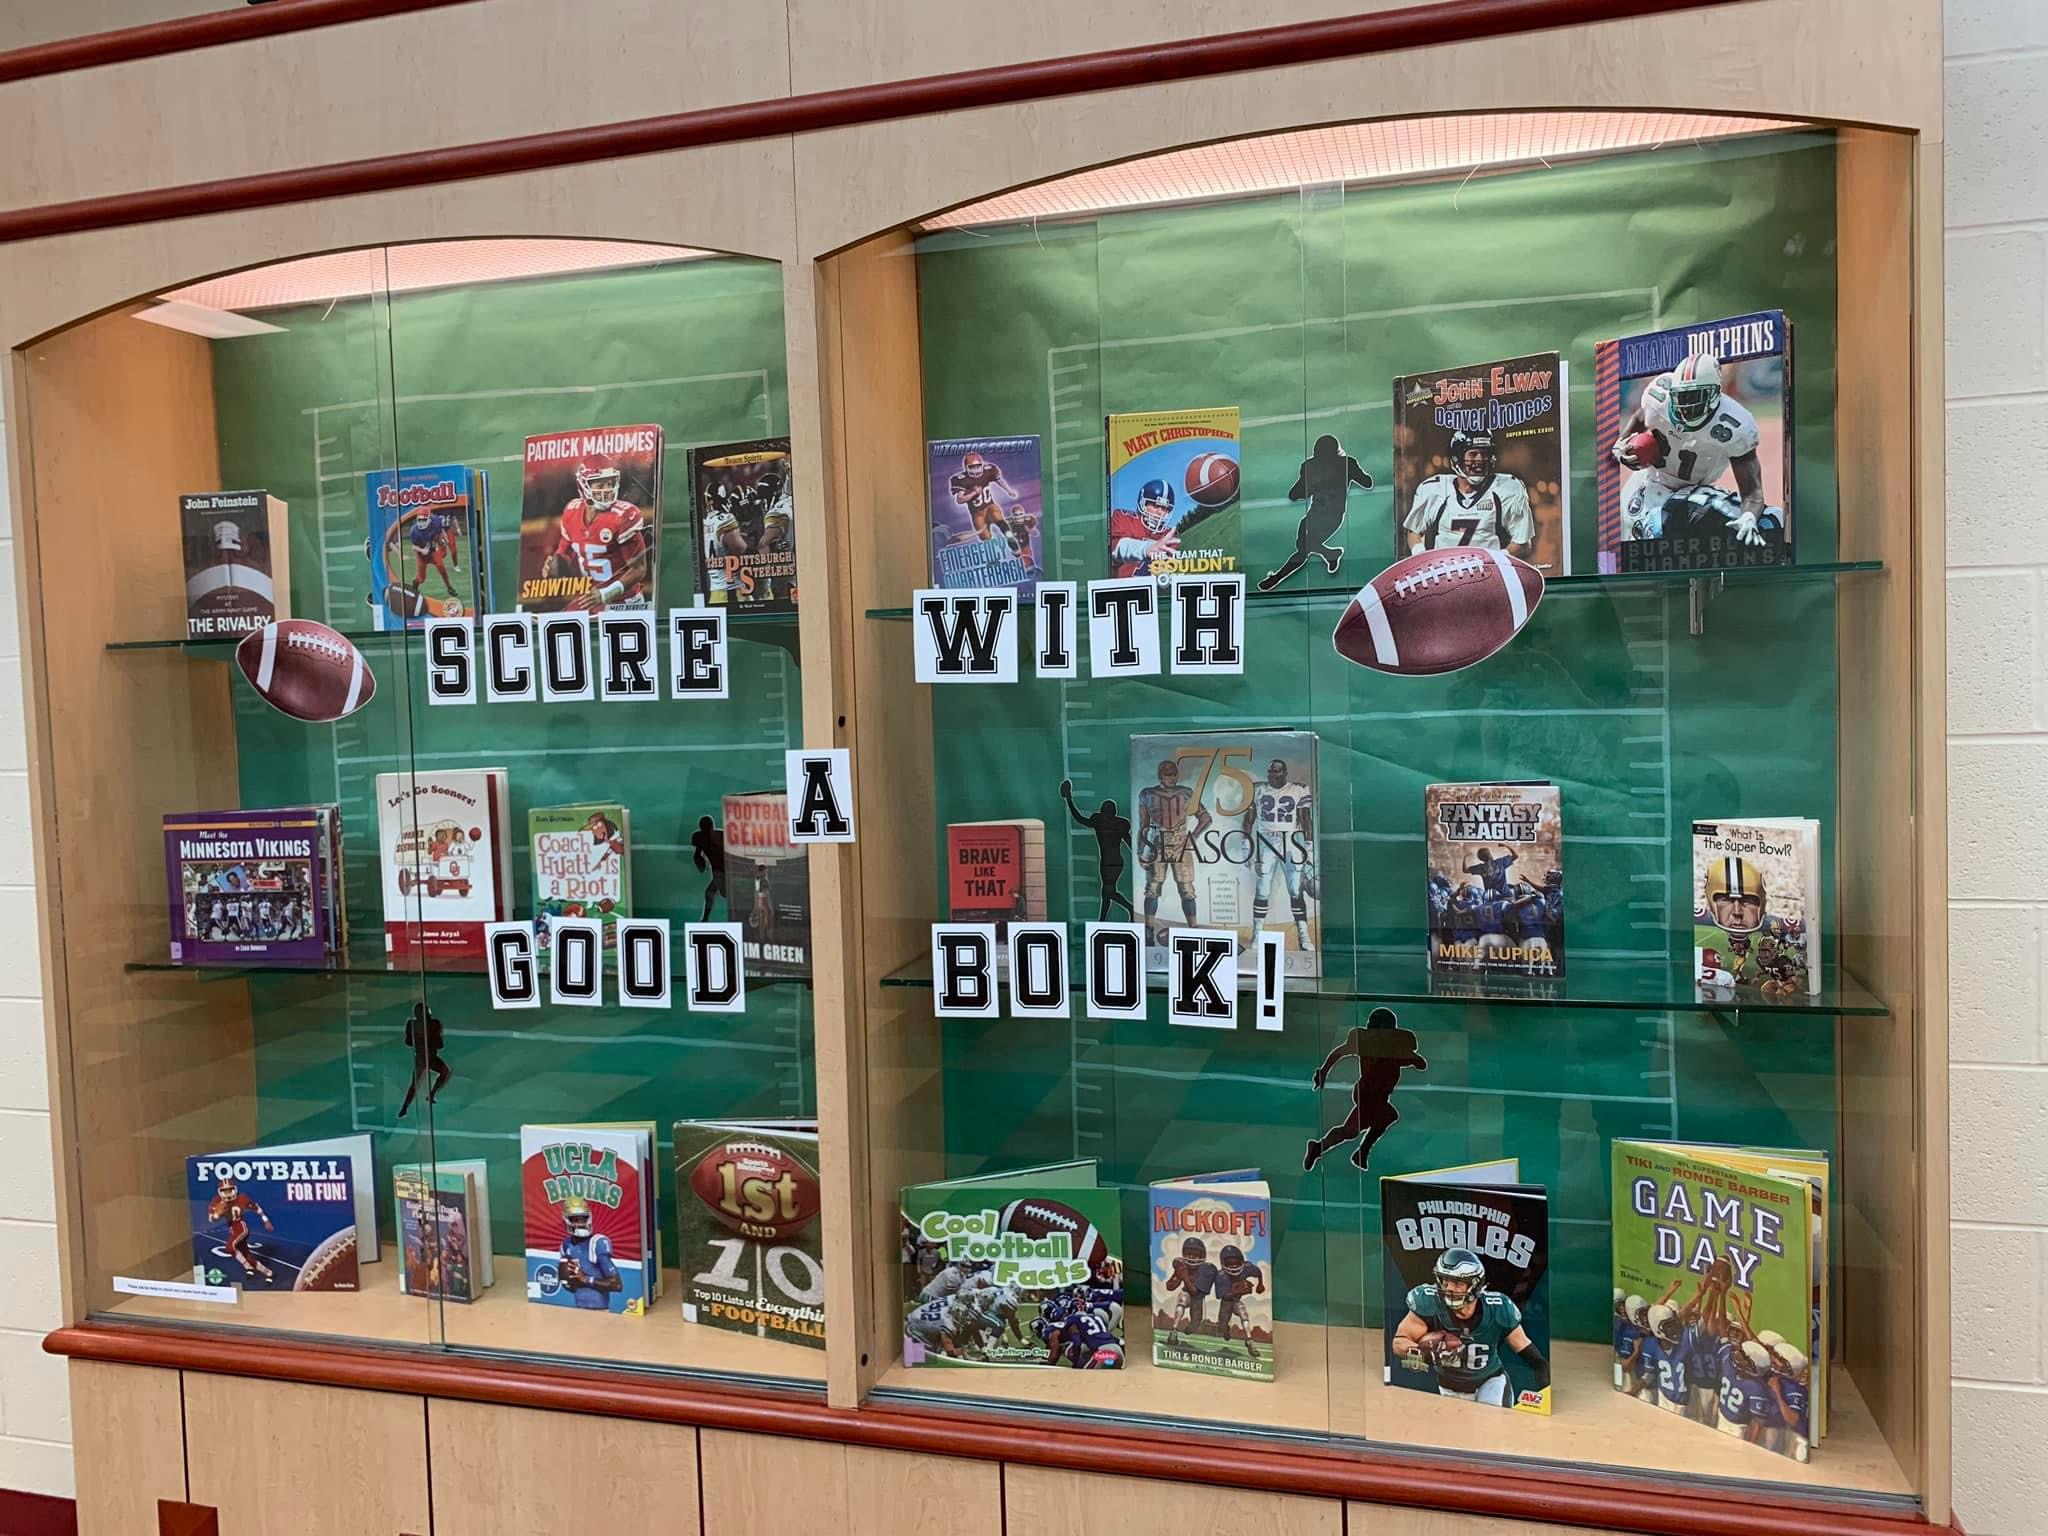 A display case cover says Score with a Good Book and has a bunch of football books